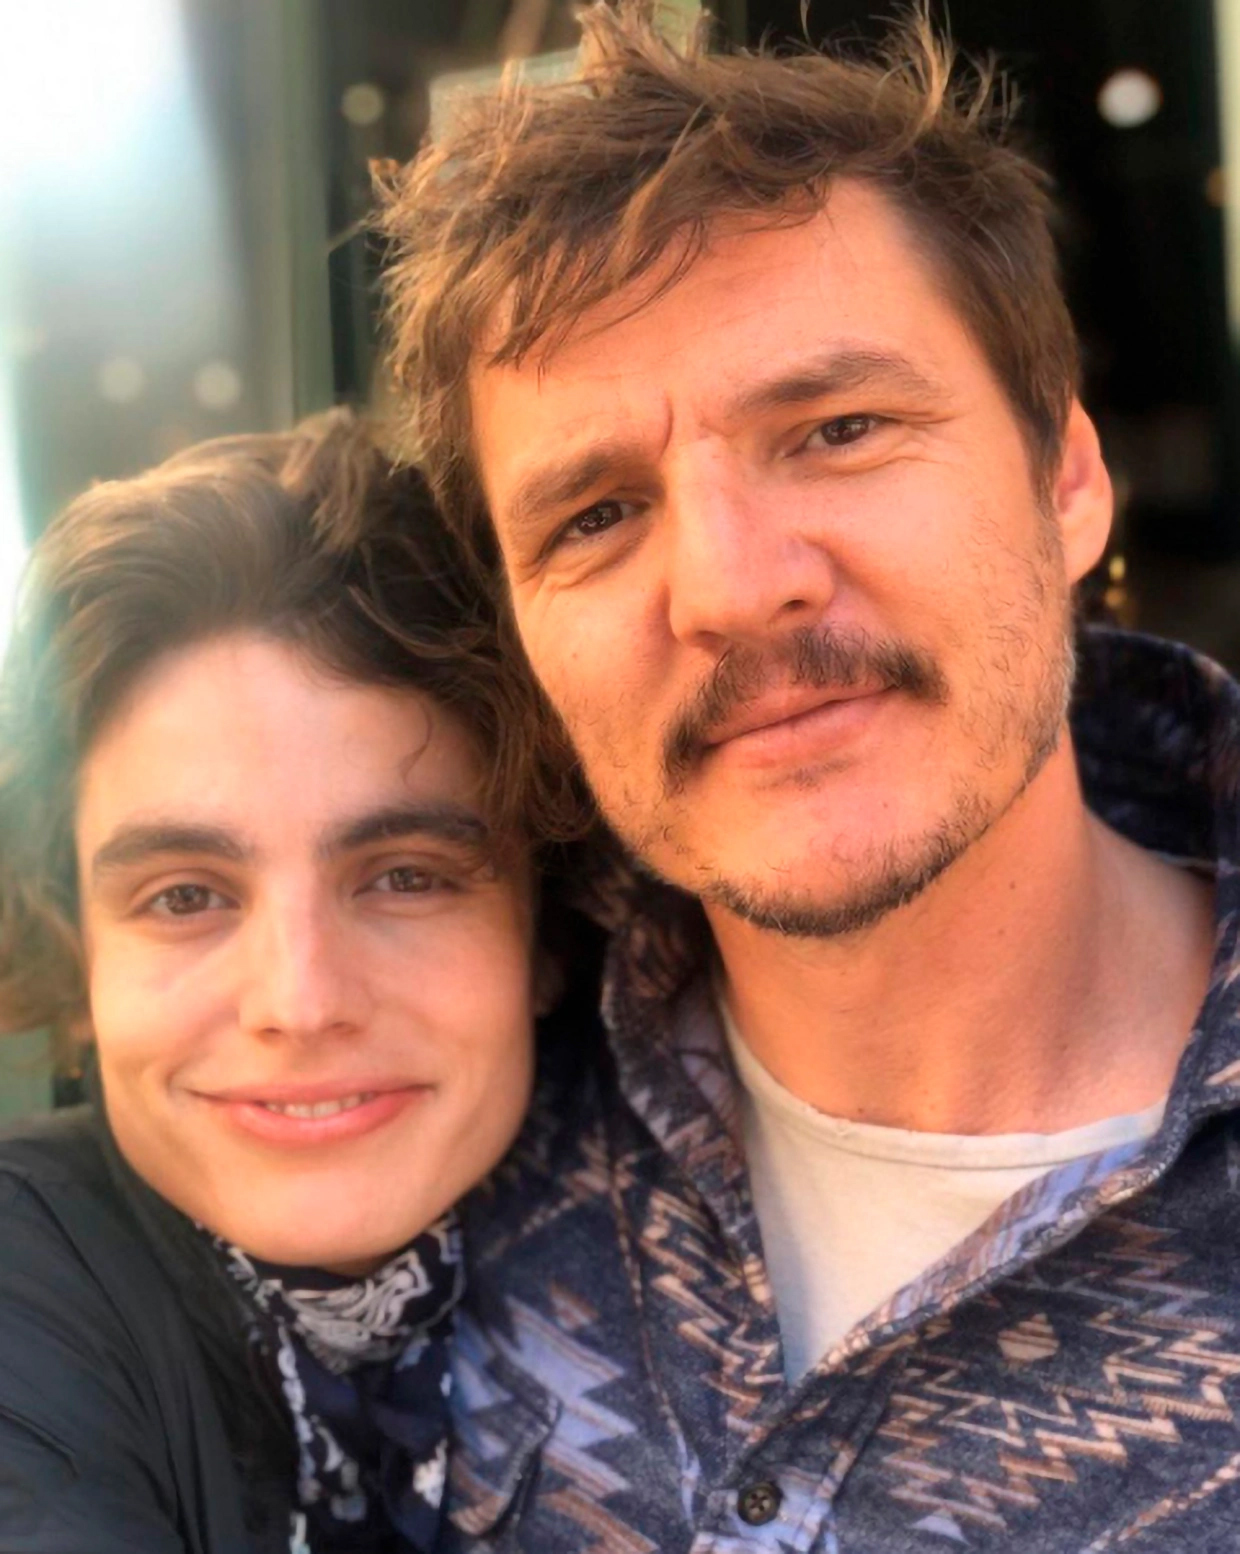 Meet Lux Pascal, the actress and trans sister of Pedro Pascal